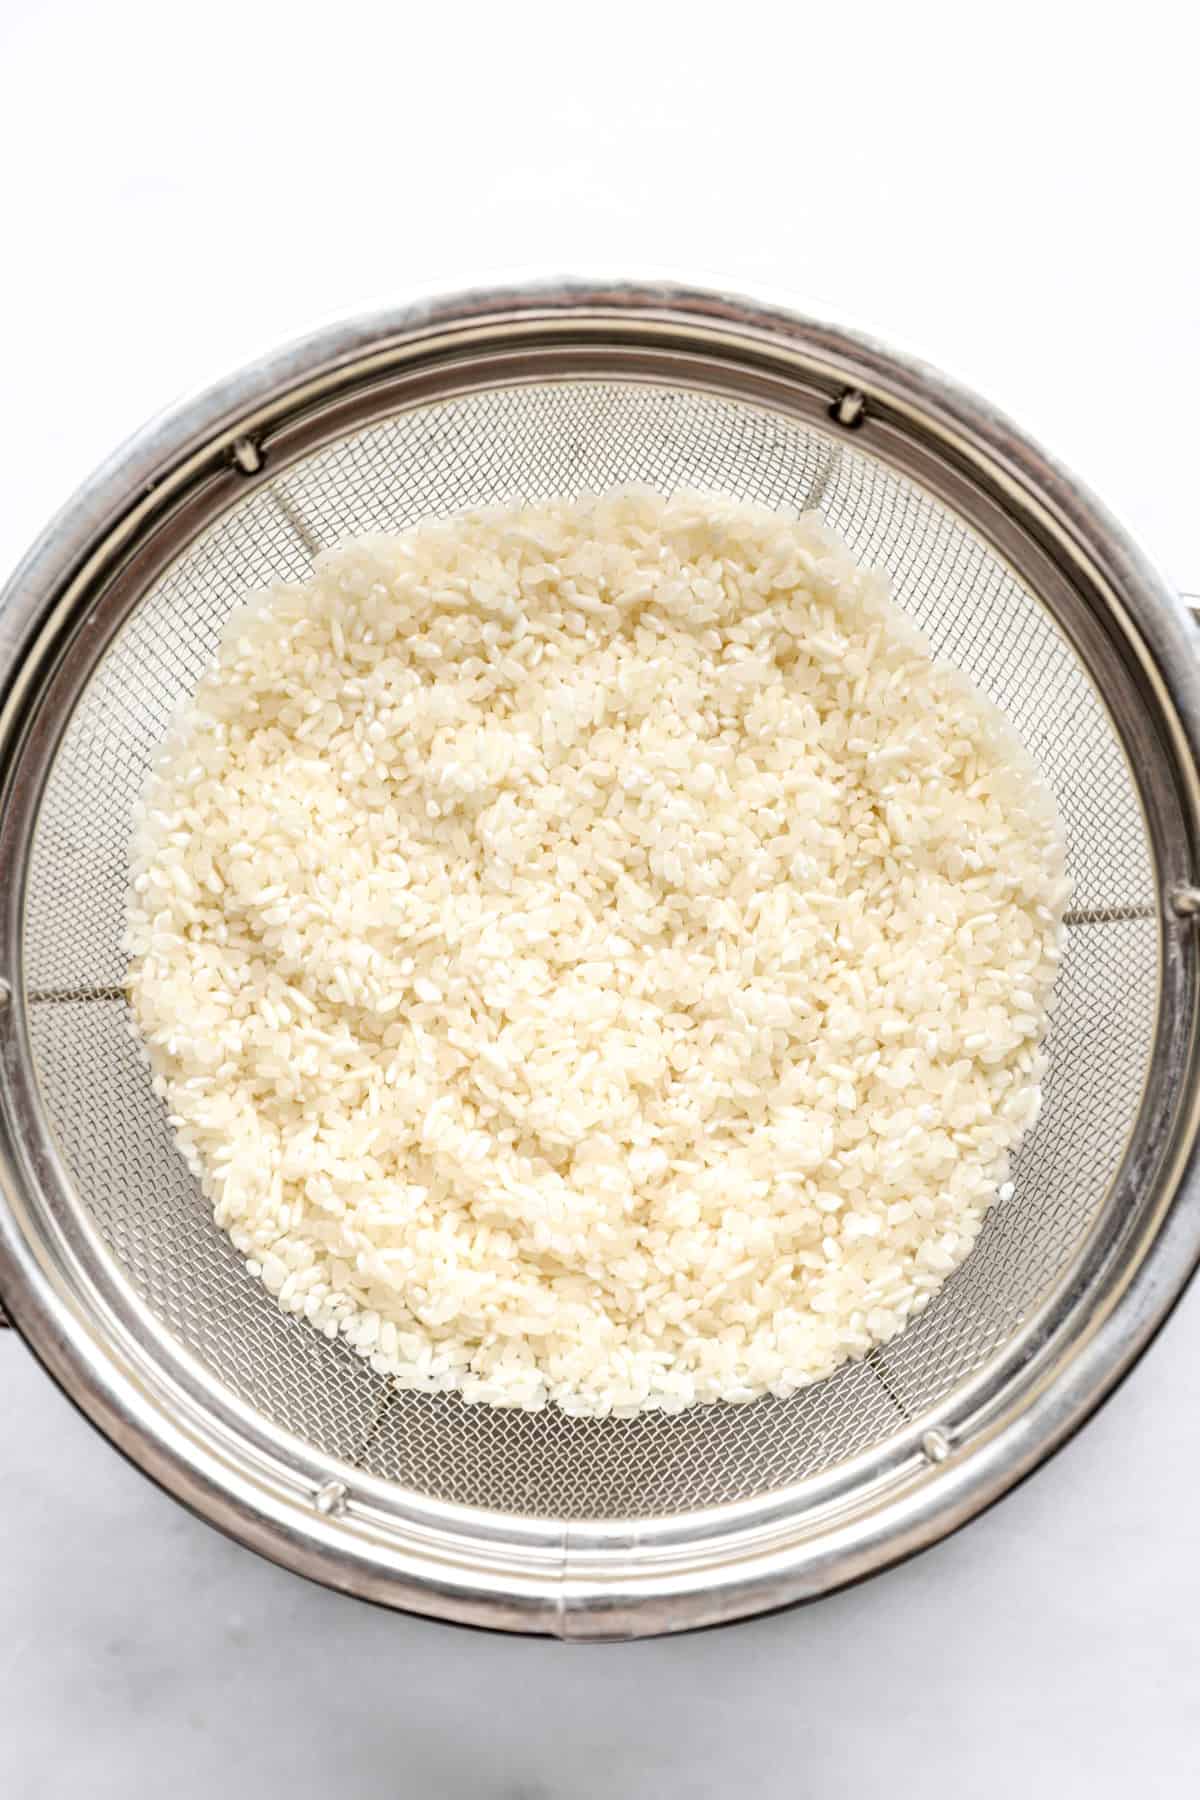 rinsed rice in a strainer from above.